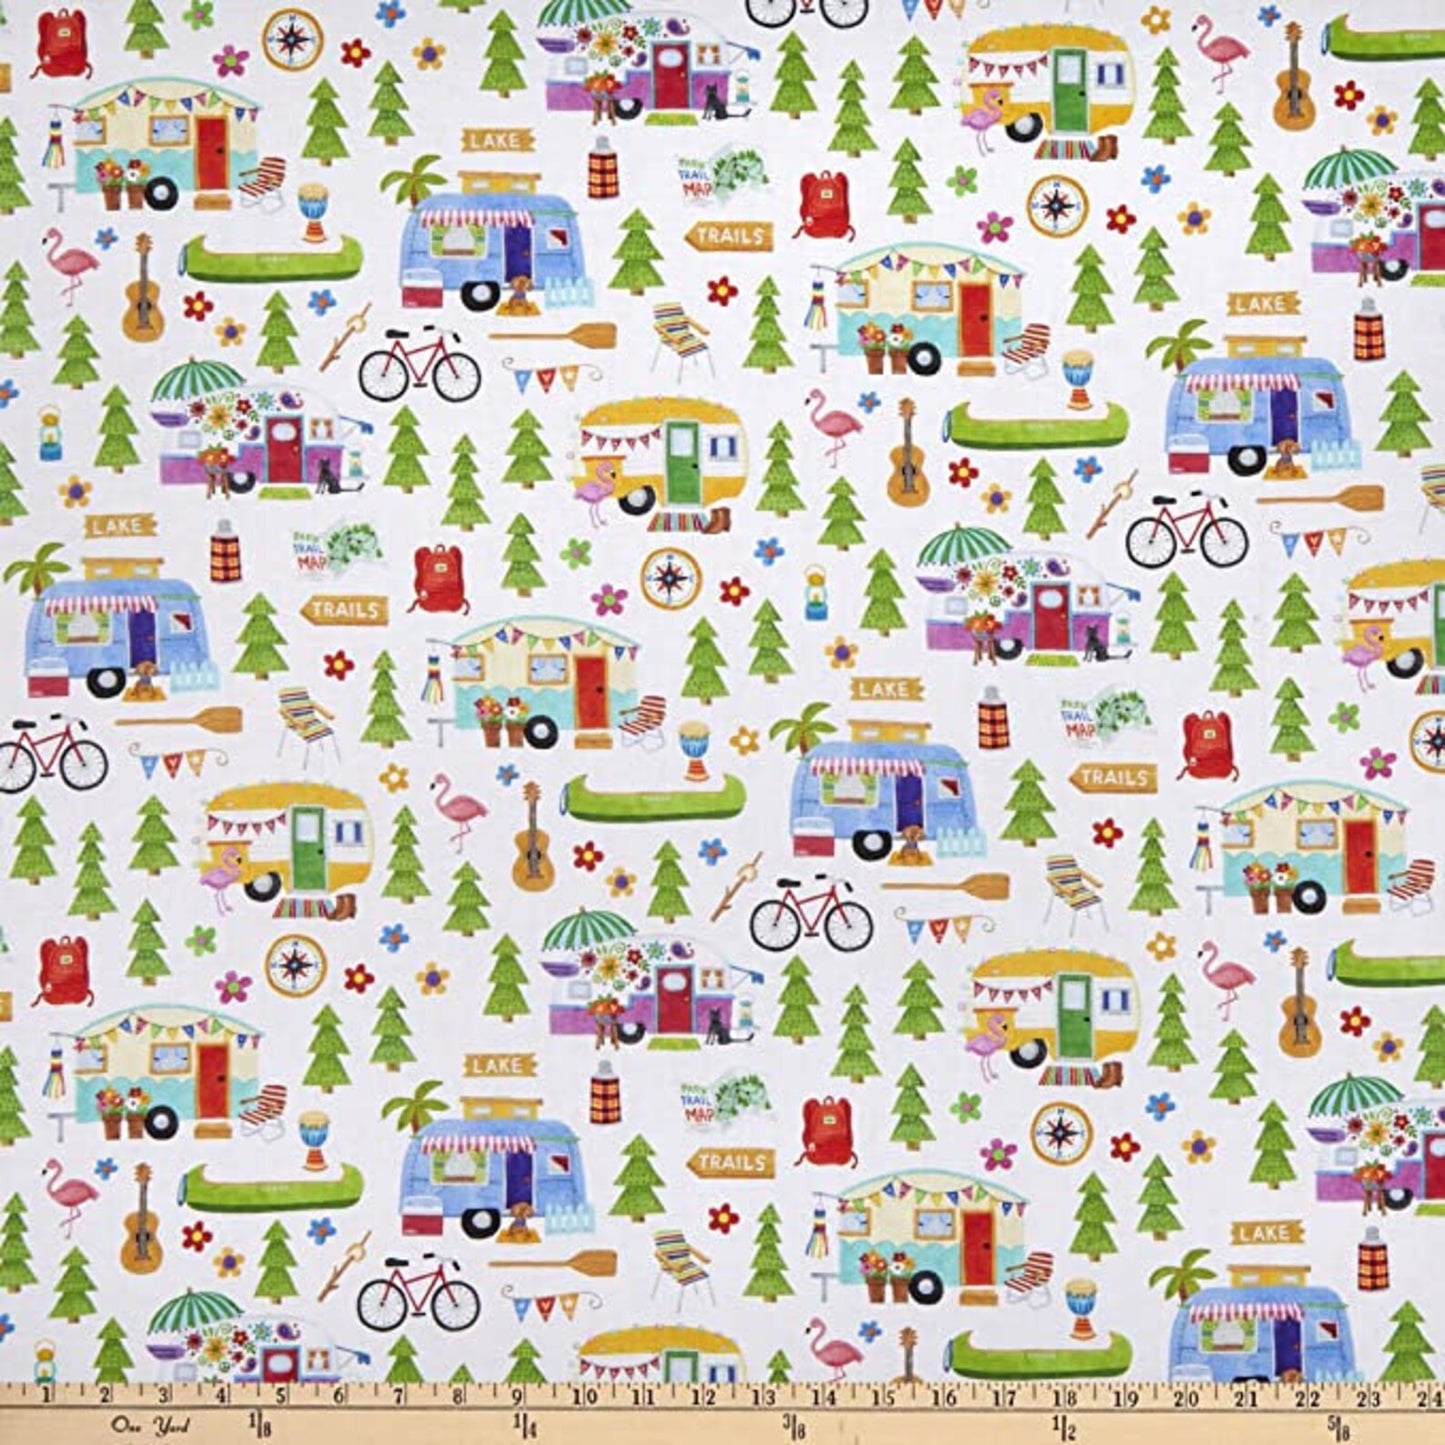 Wanderlust Camping Fabric by Stephanie Peterson Jones for P&B Textiles